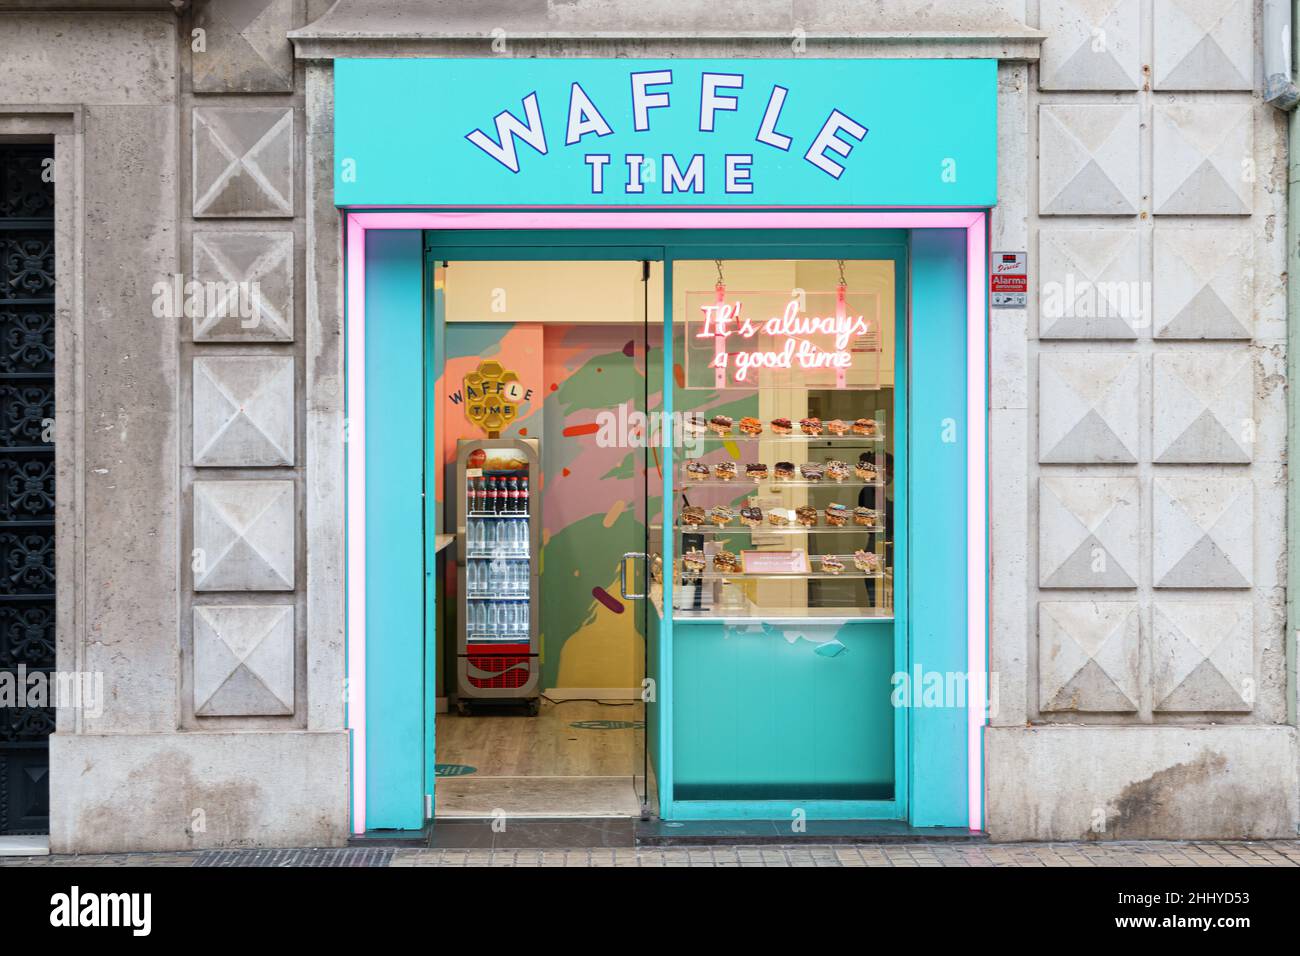 VALENCIA, SPAIN - JANUARY 24, 2022: Waffle Time is a company specialized in cooking and serving handmade Belgian waffles Stock Photo